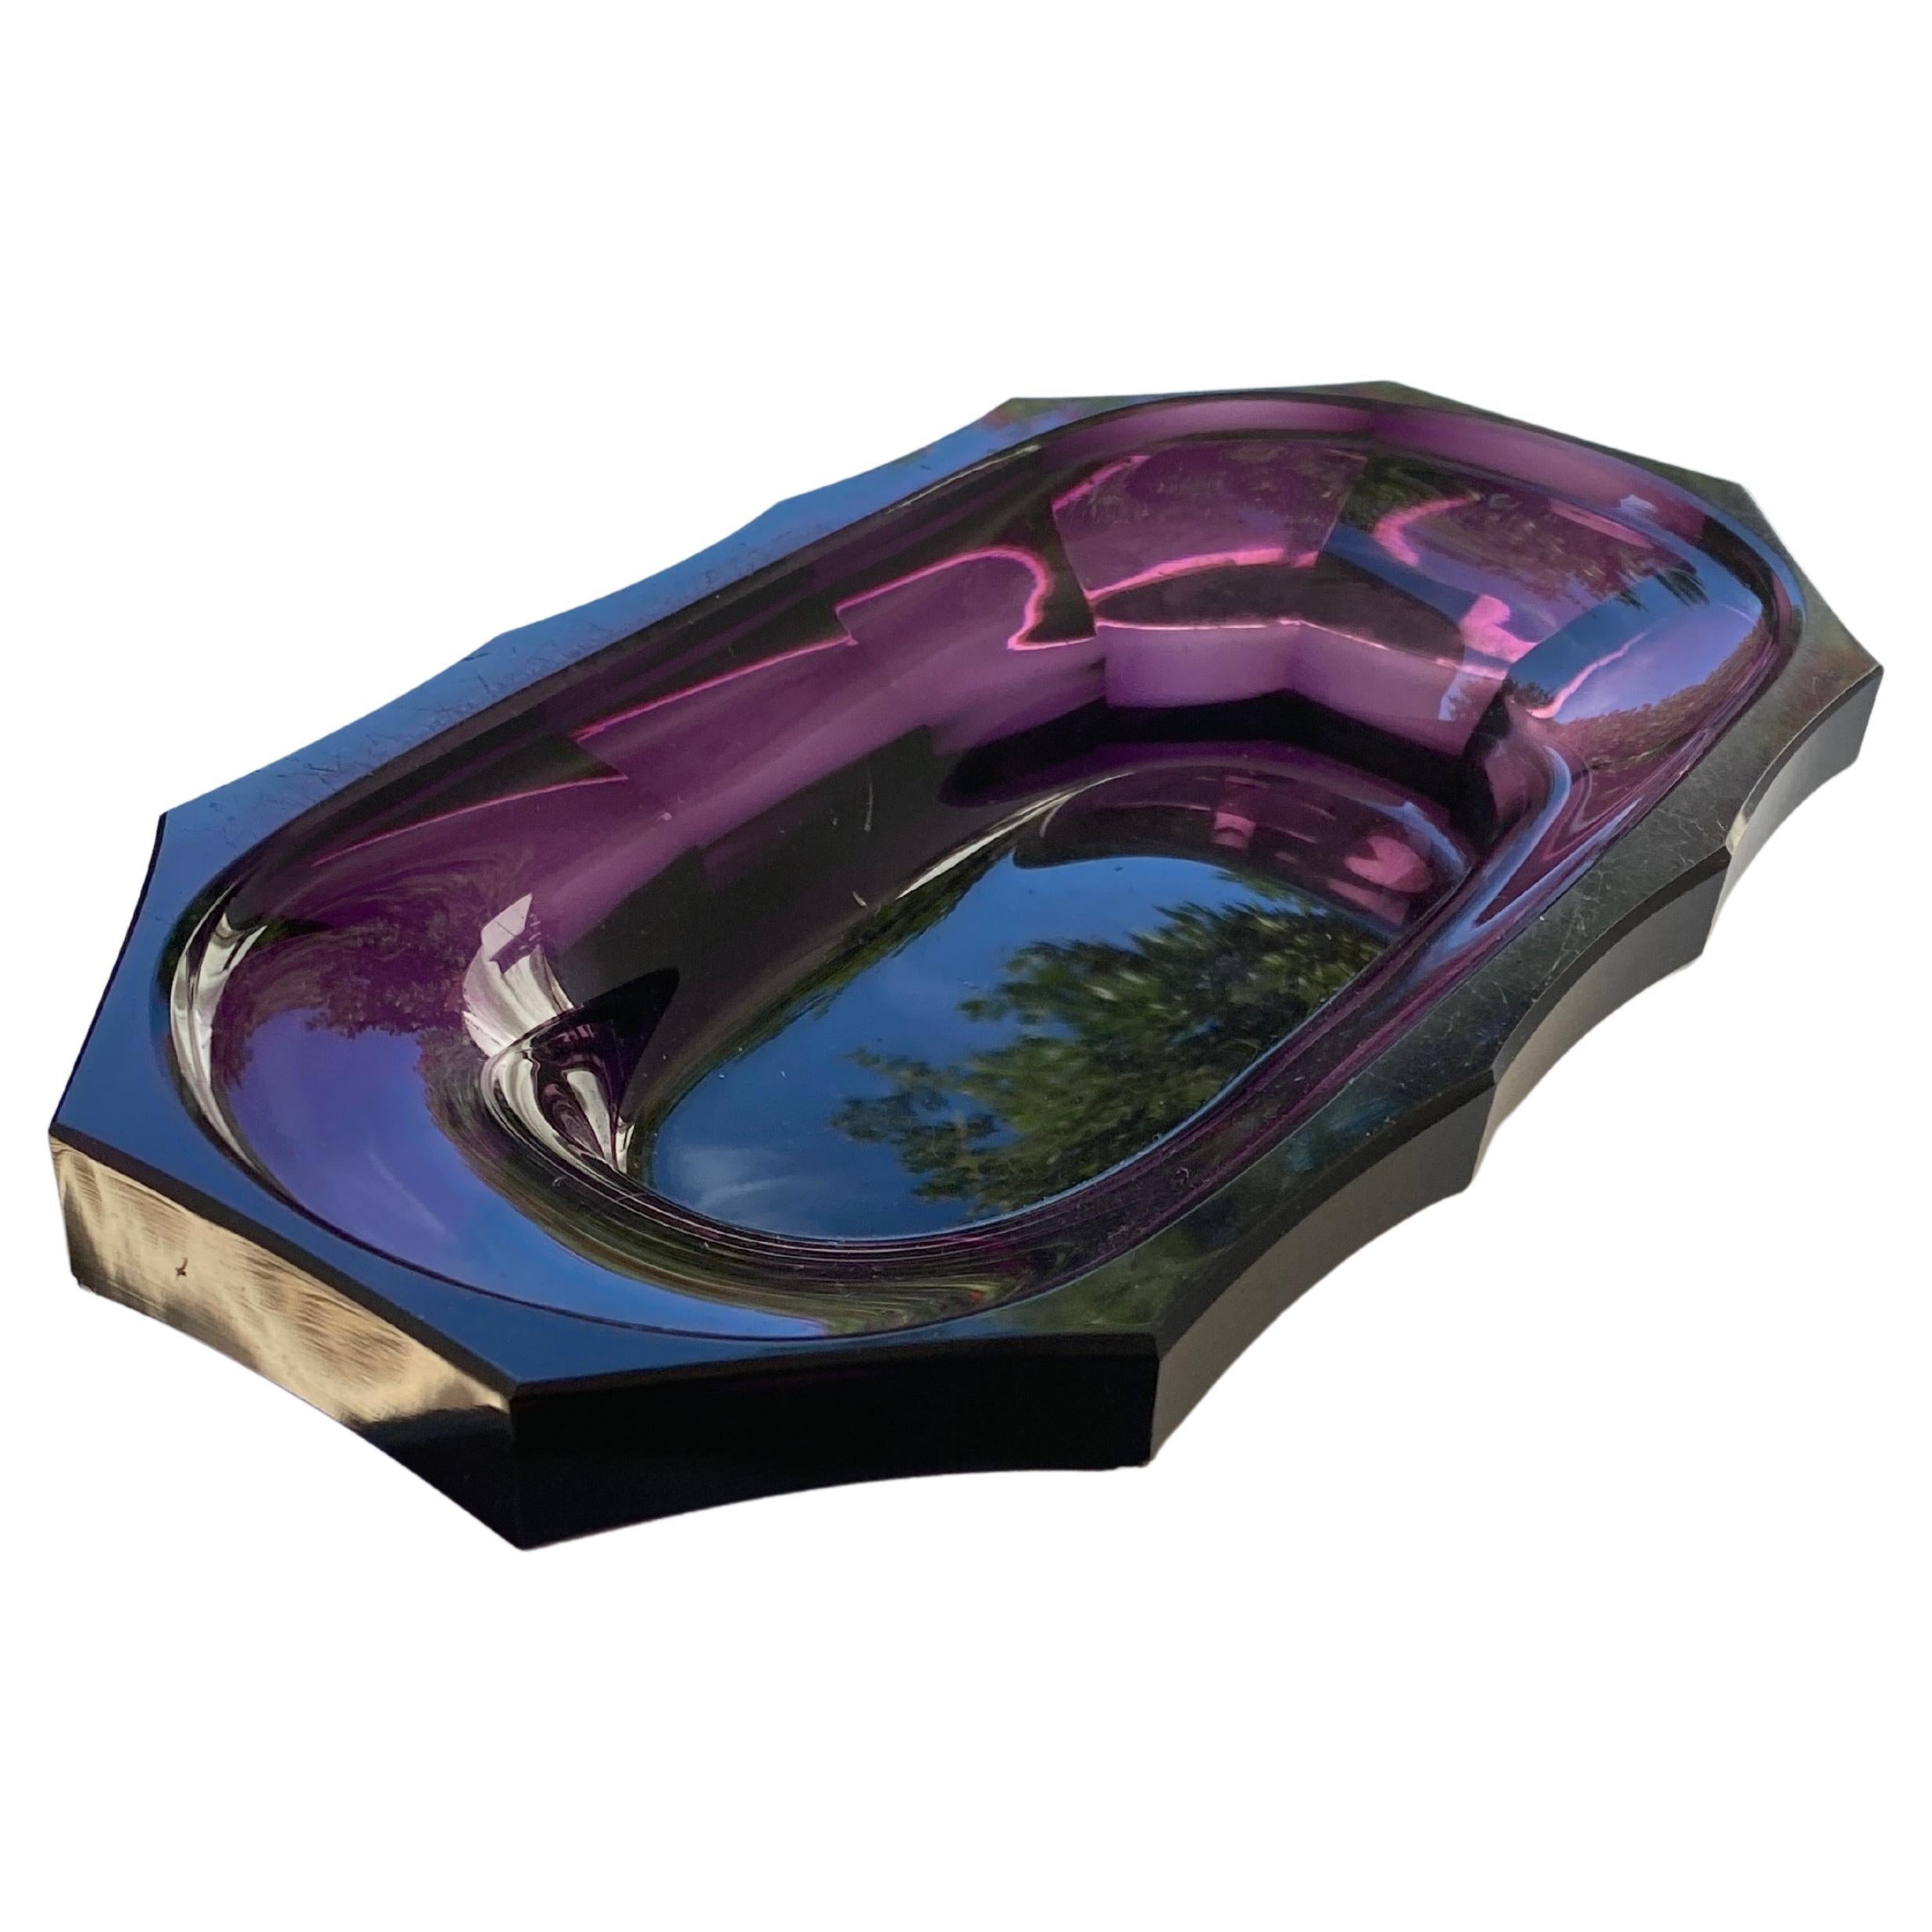 Art Deco Vide Poche or Ashtray, in Purple Color, in Art Glass, from France 1940